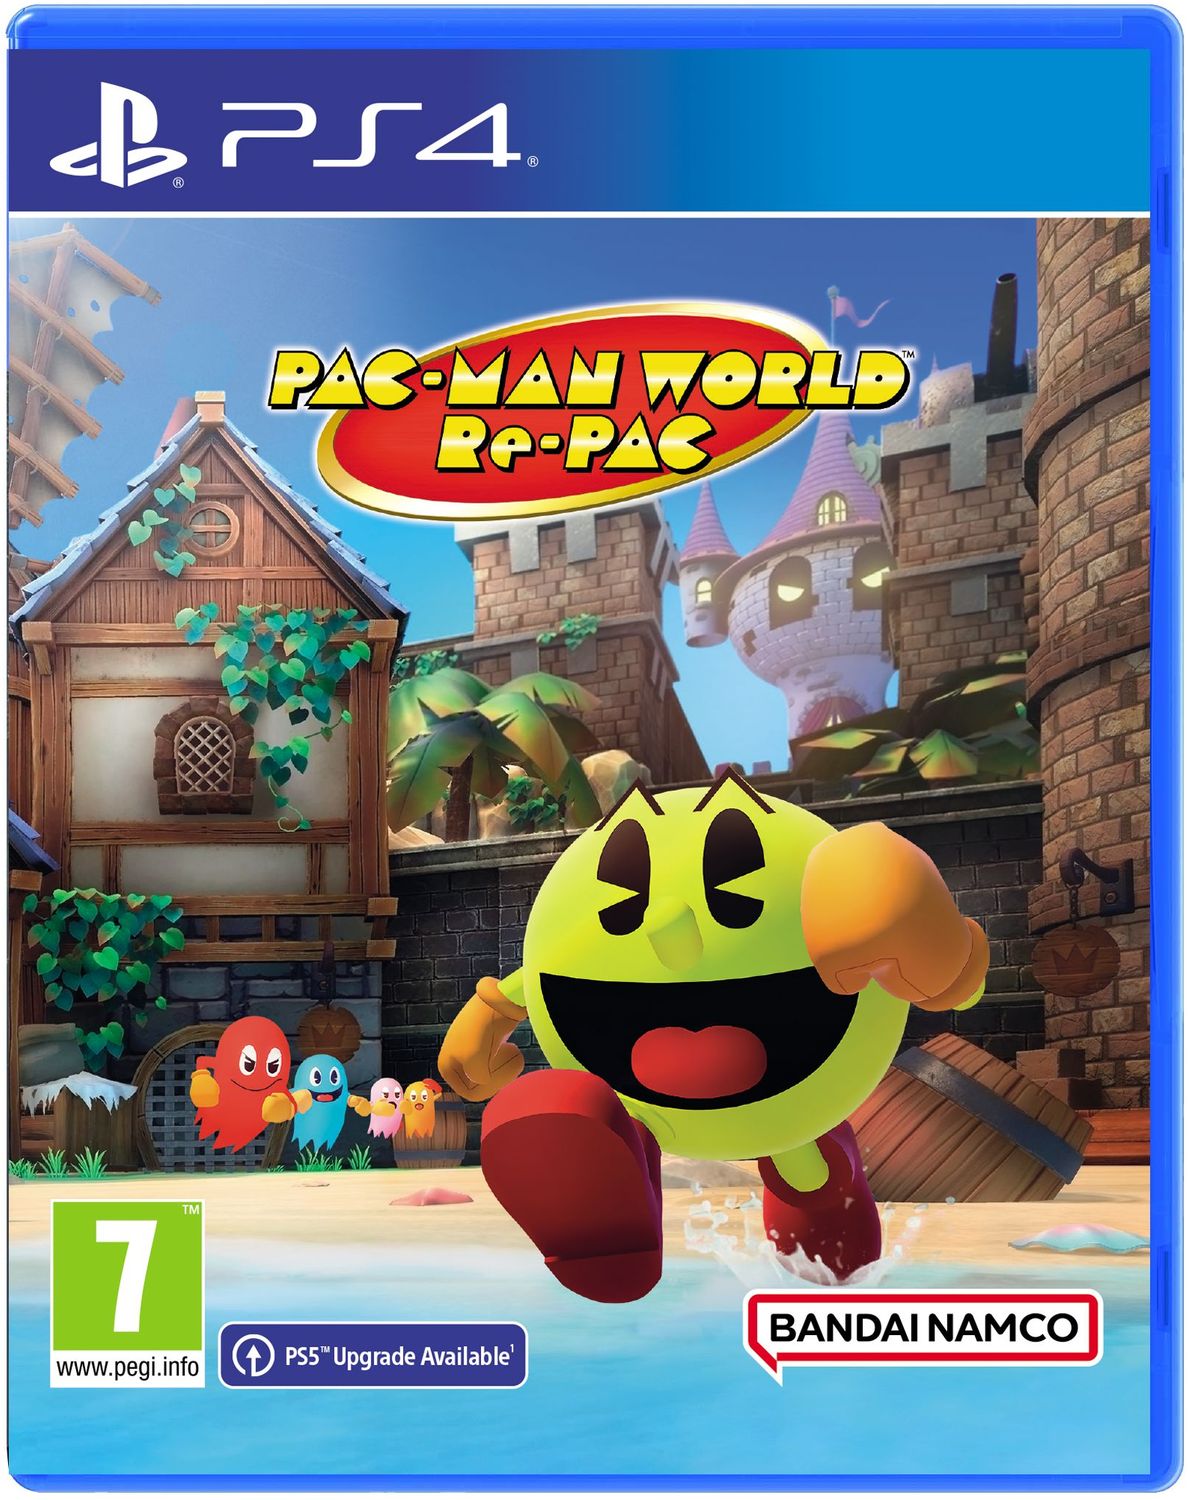  PAC-MAN WORLD Re-PAC (PS4)